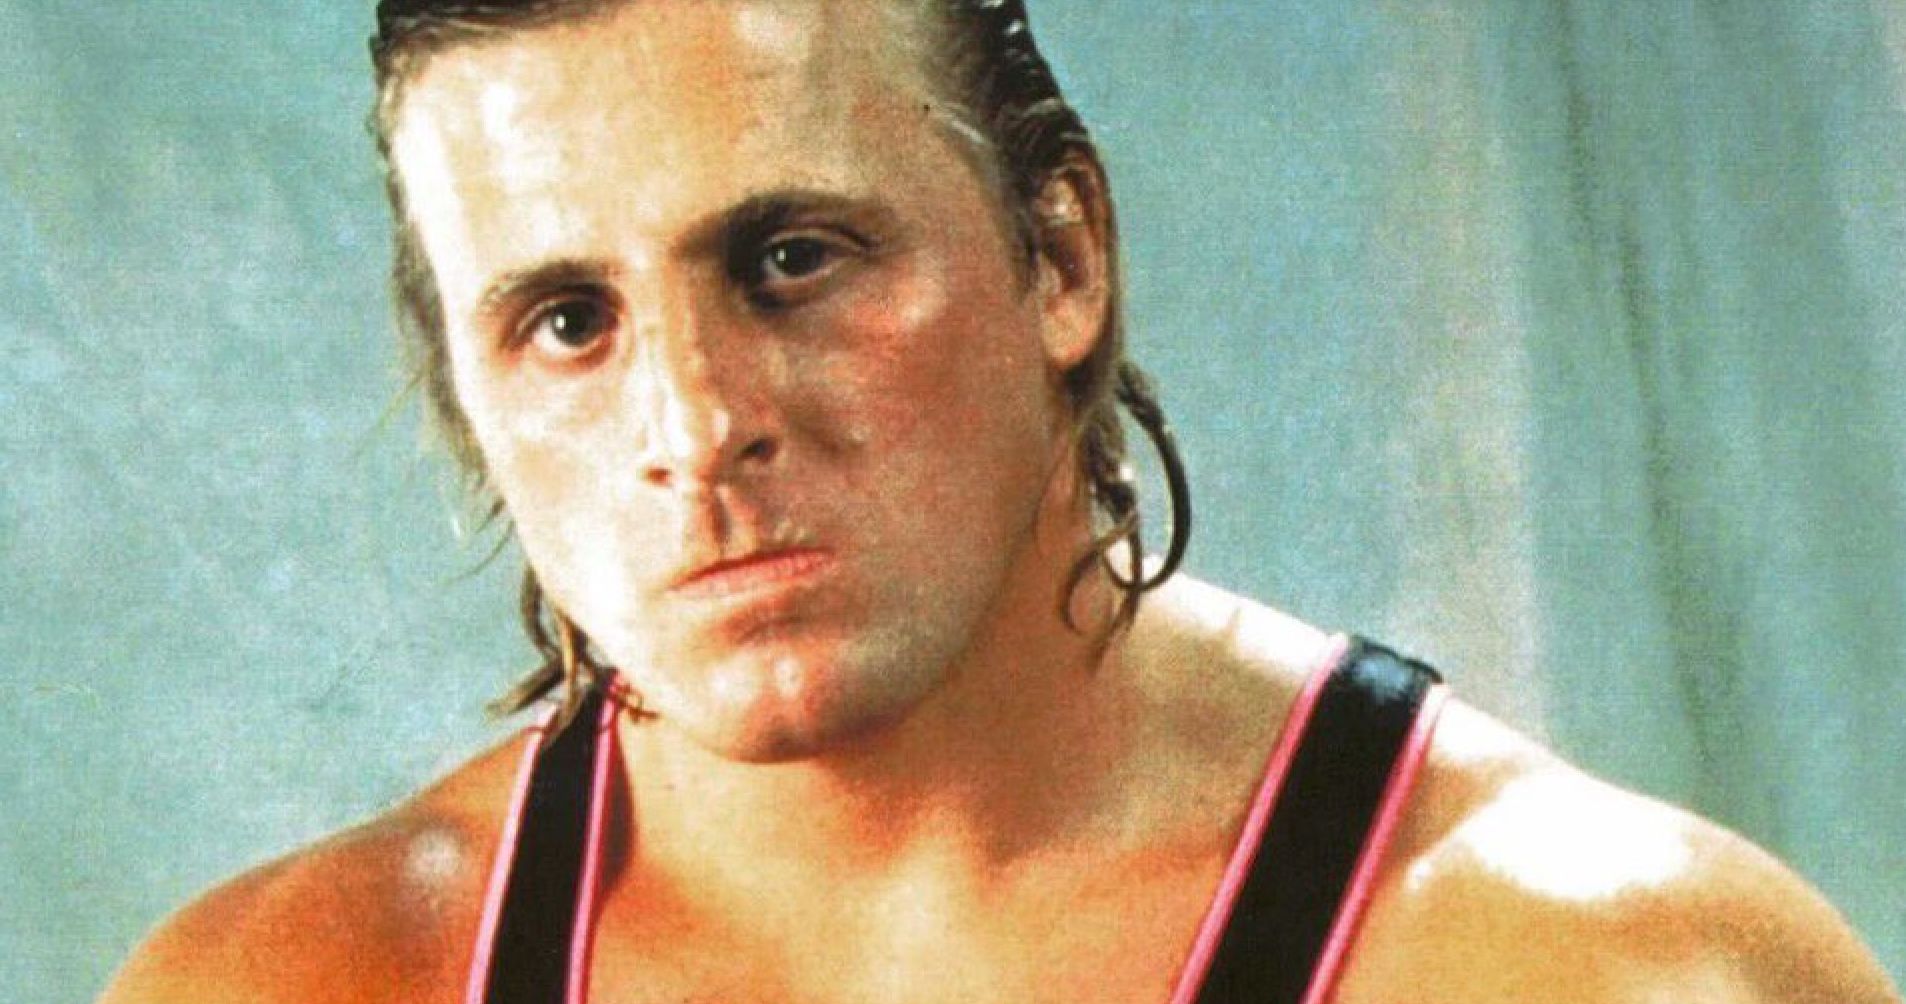 AEW Partners Up with Owen Hart Foundation to Honor the Late Wrestling Superstar